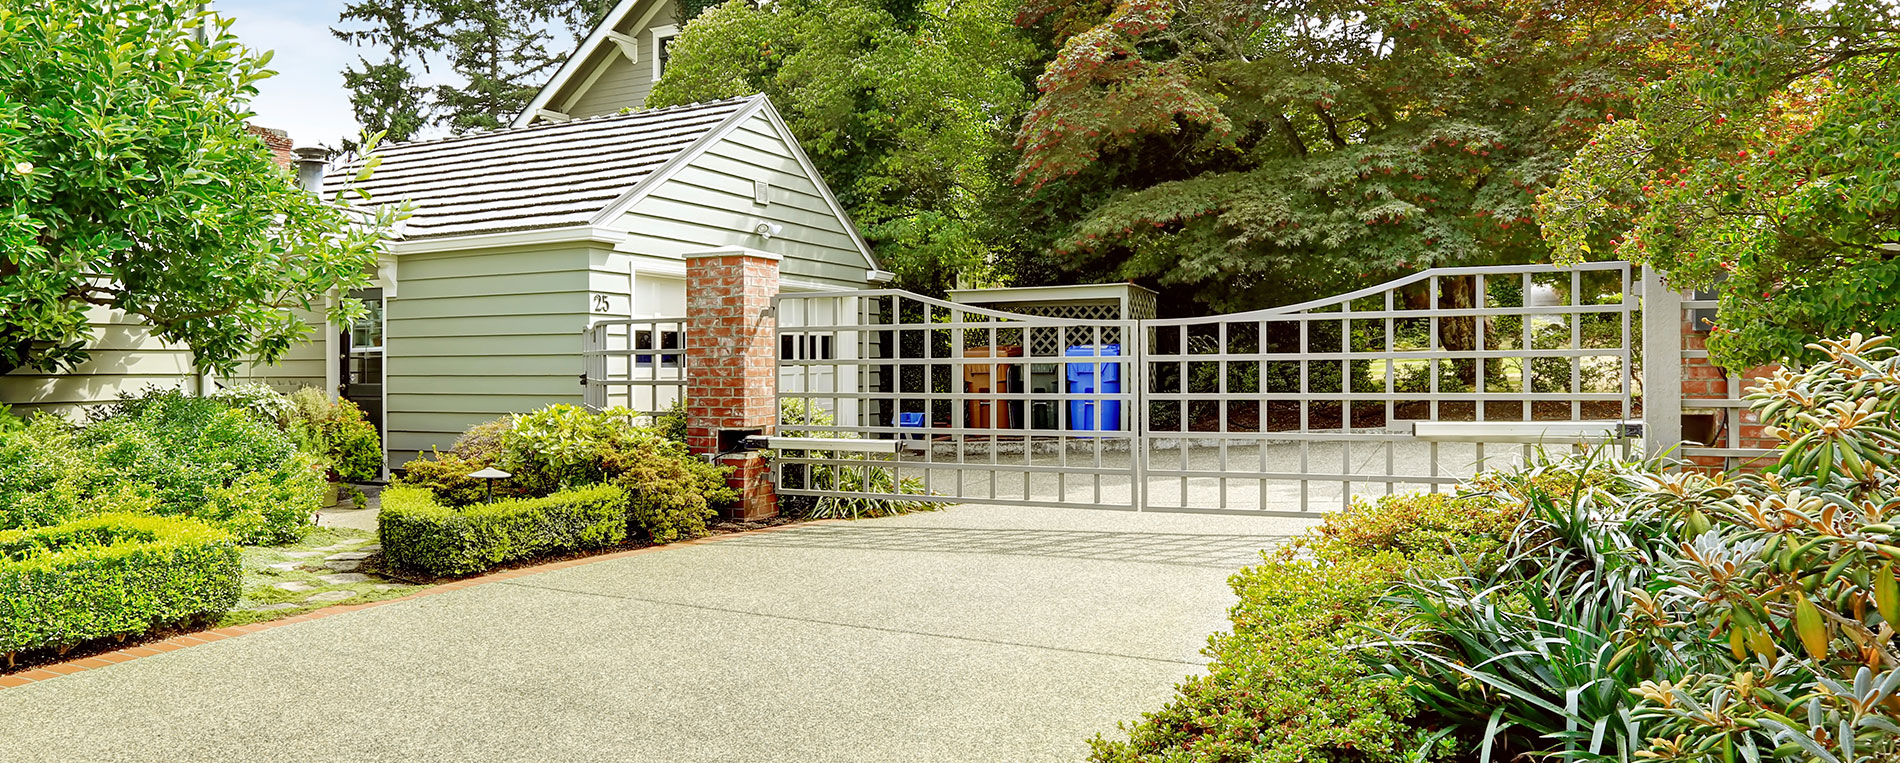 Things to Consider When Buying a Driveway Gate